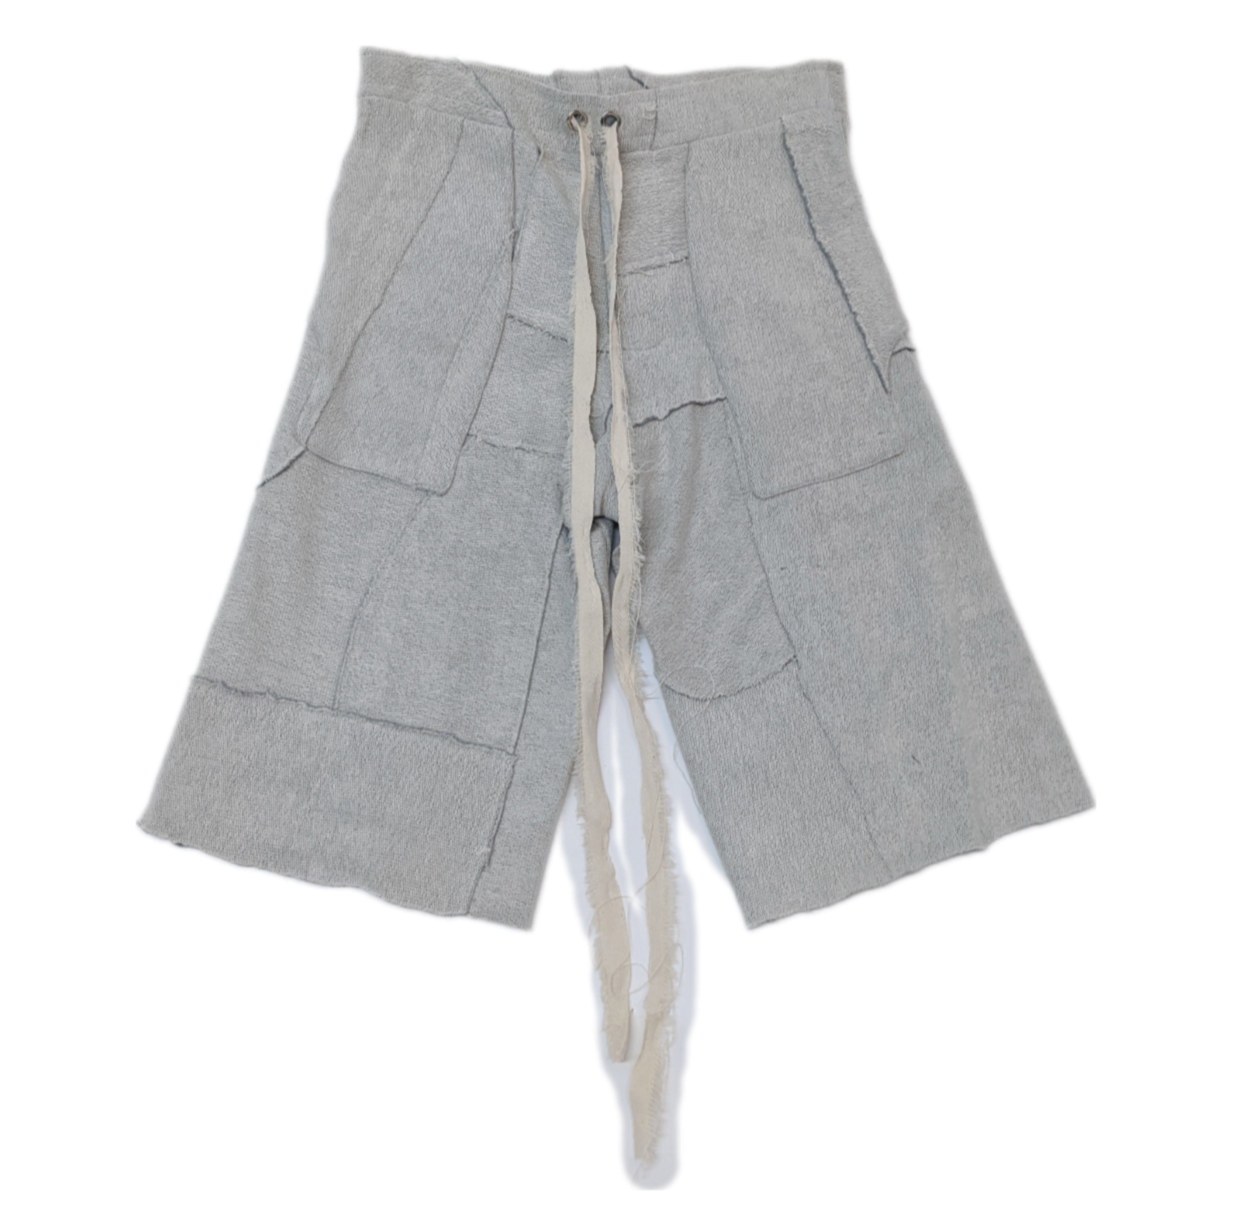 Hand Patched Wide Leg Kickback Drawstring Shorts in Grey Loopback Cotton jersey